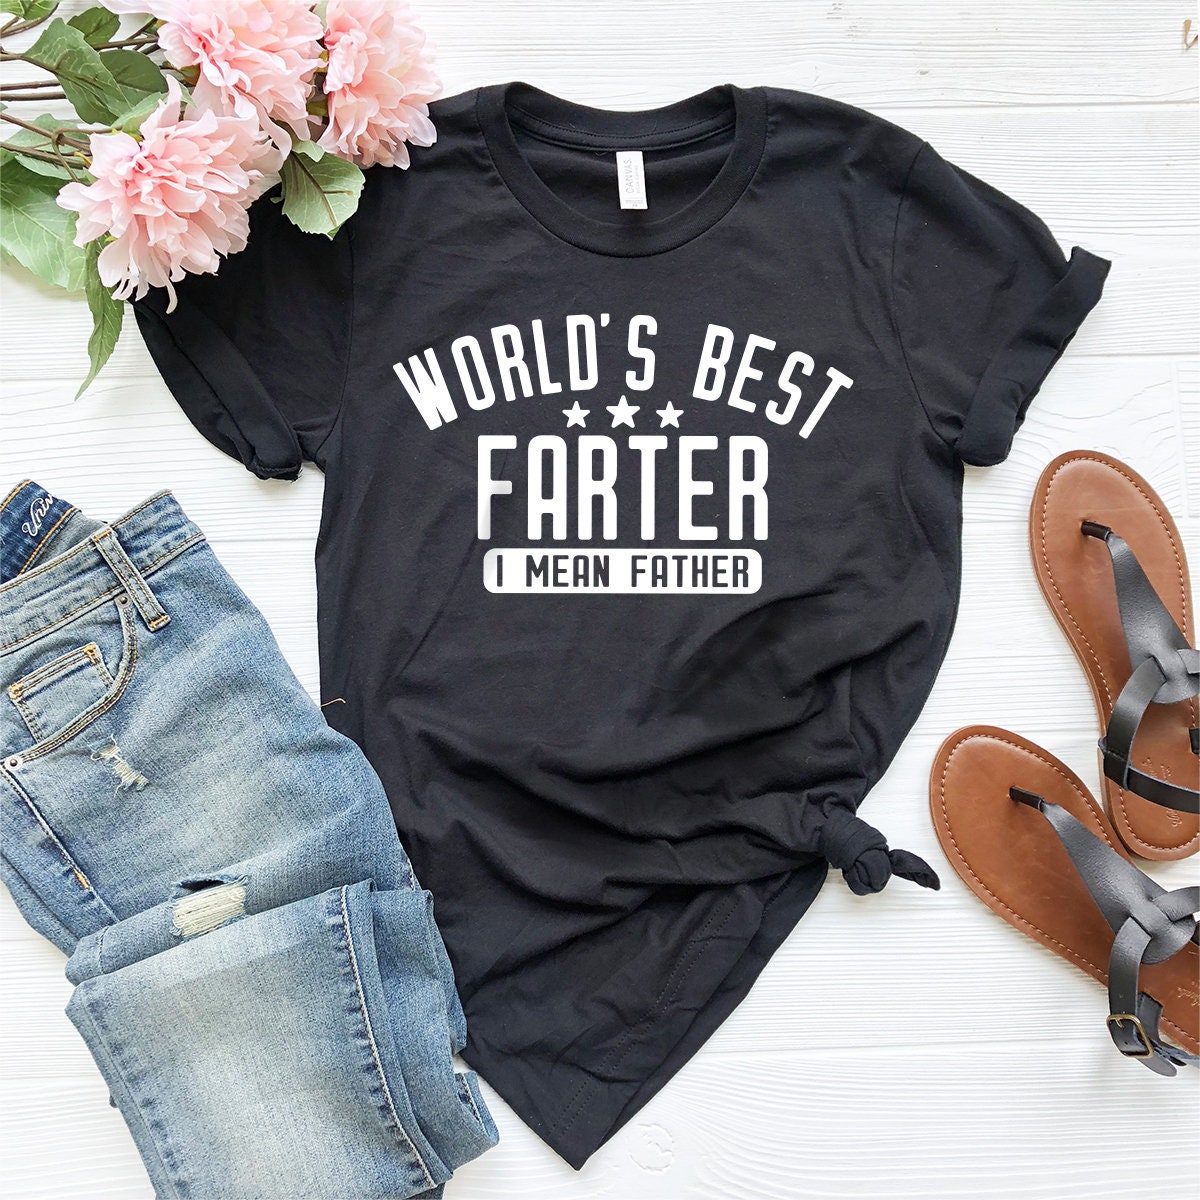 Funny Dad Shirt, Dad Birthday Gift, Dad Gift, Gift For Dad, Father Humor Shirt, Farter Father Tee, World's Best Farter I Mean Father Shirt, - Fastdeliverytees.com